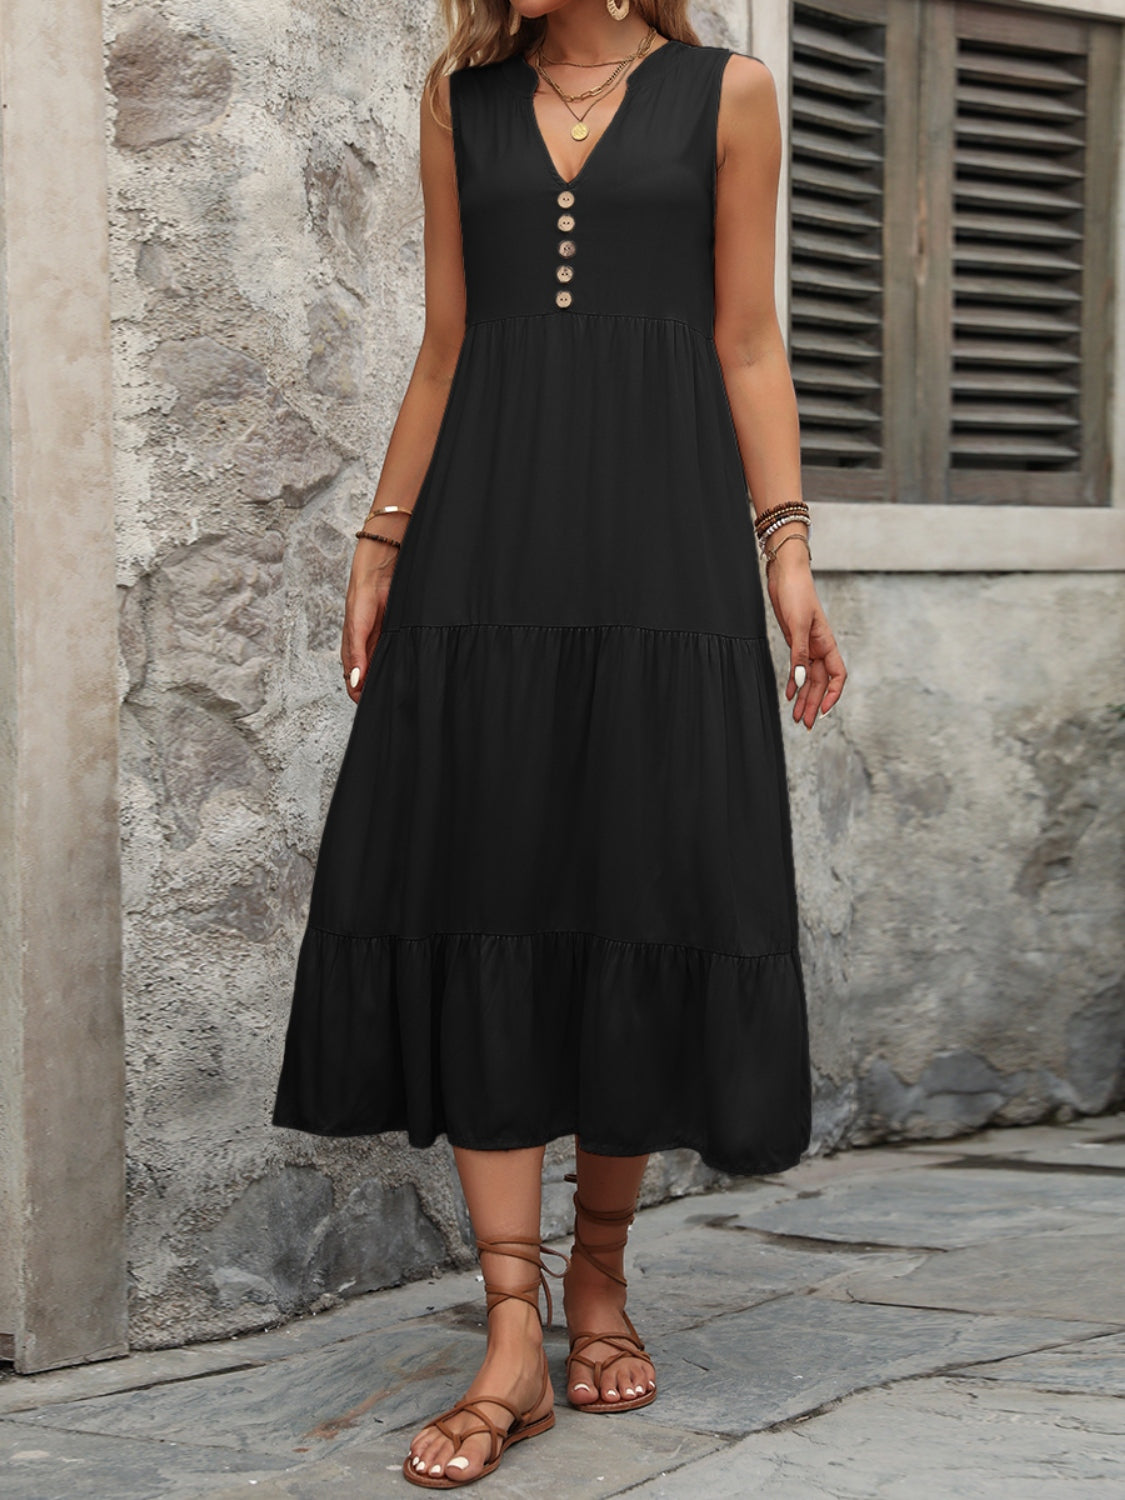 Cotton Sleeveless Dress with Decorative Buttons Black